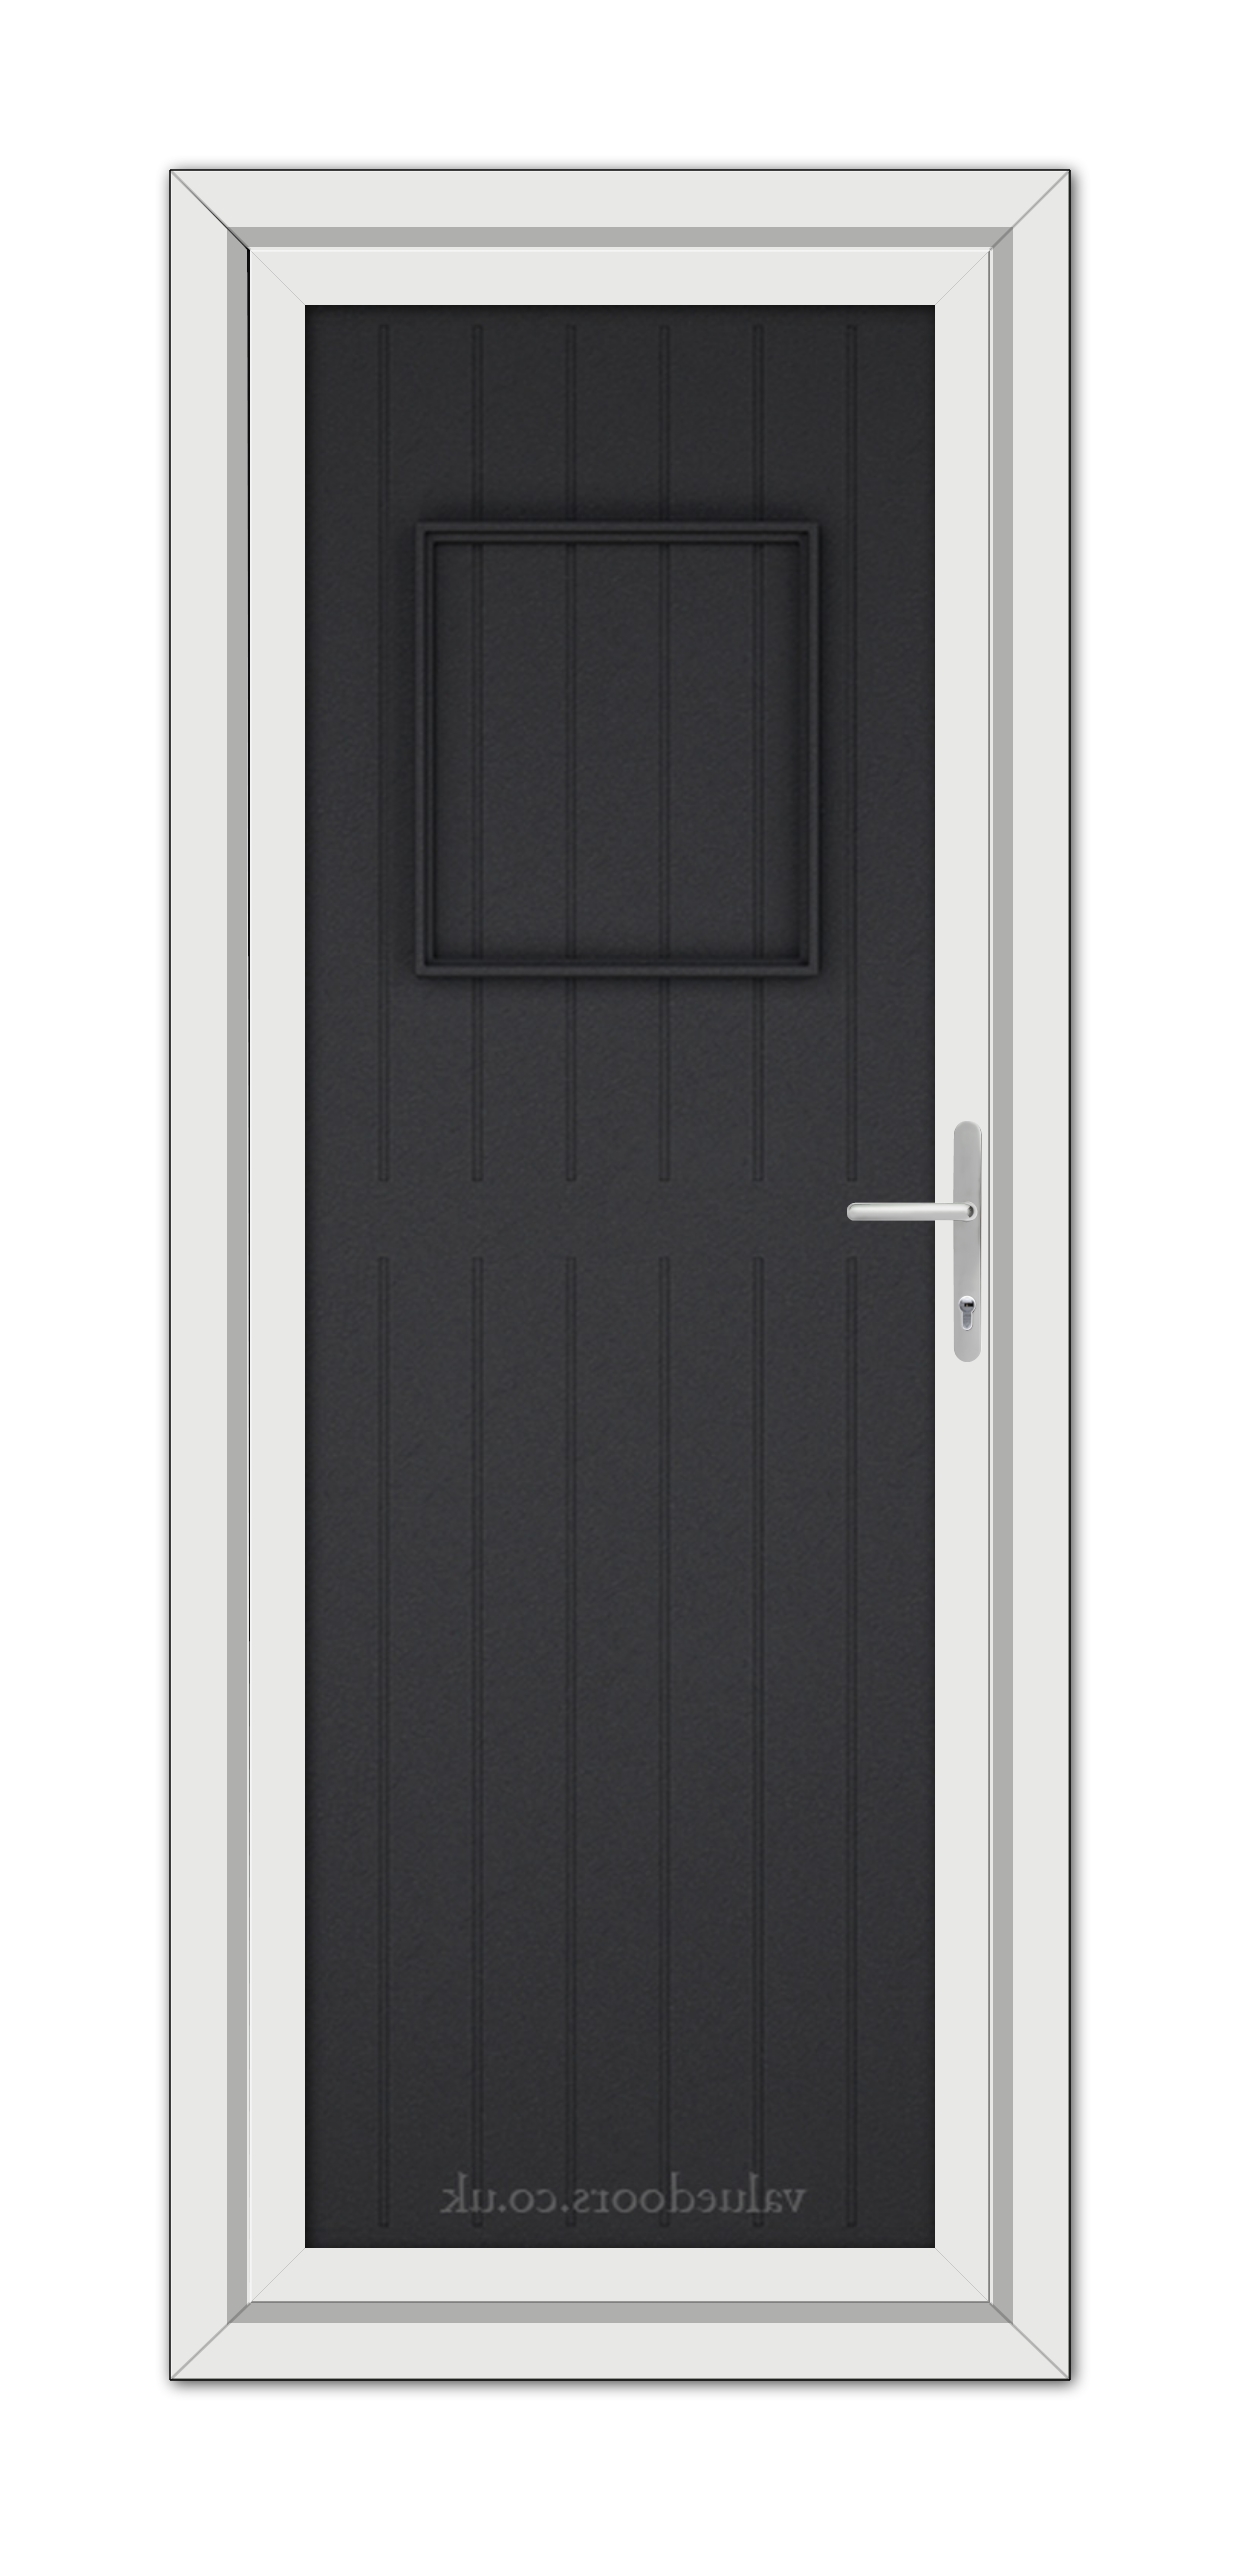 A modern Black Brown Chatsworth Solid uPVC Door with a vertical window at the top, set in a white frame, featuring a stainless steel handle on the right side.